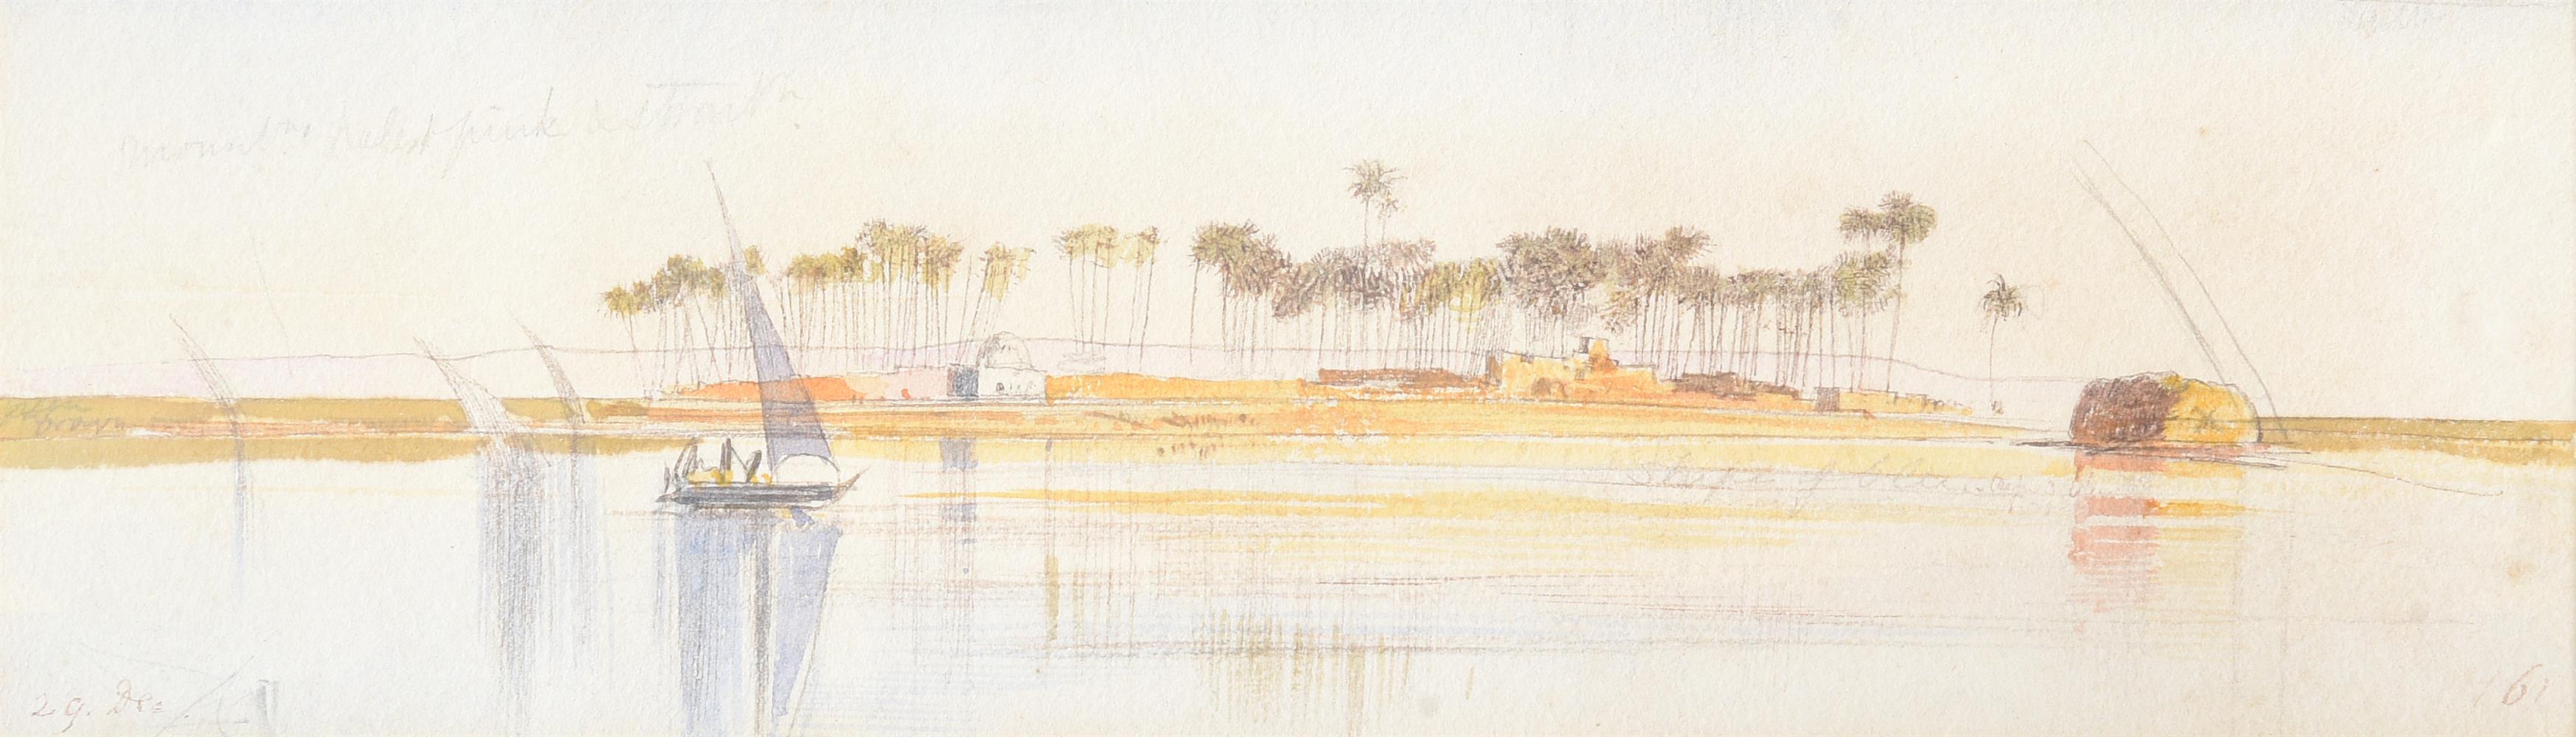 EDWARD LEAR (ENGLISH 1812-1888), DHOWS ON THE NILE - Image 2 of 2